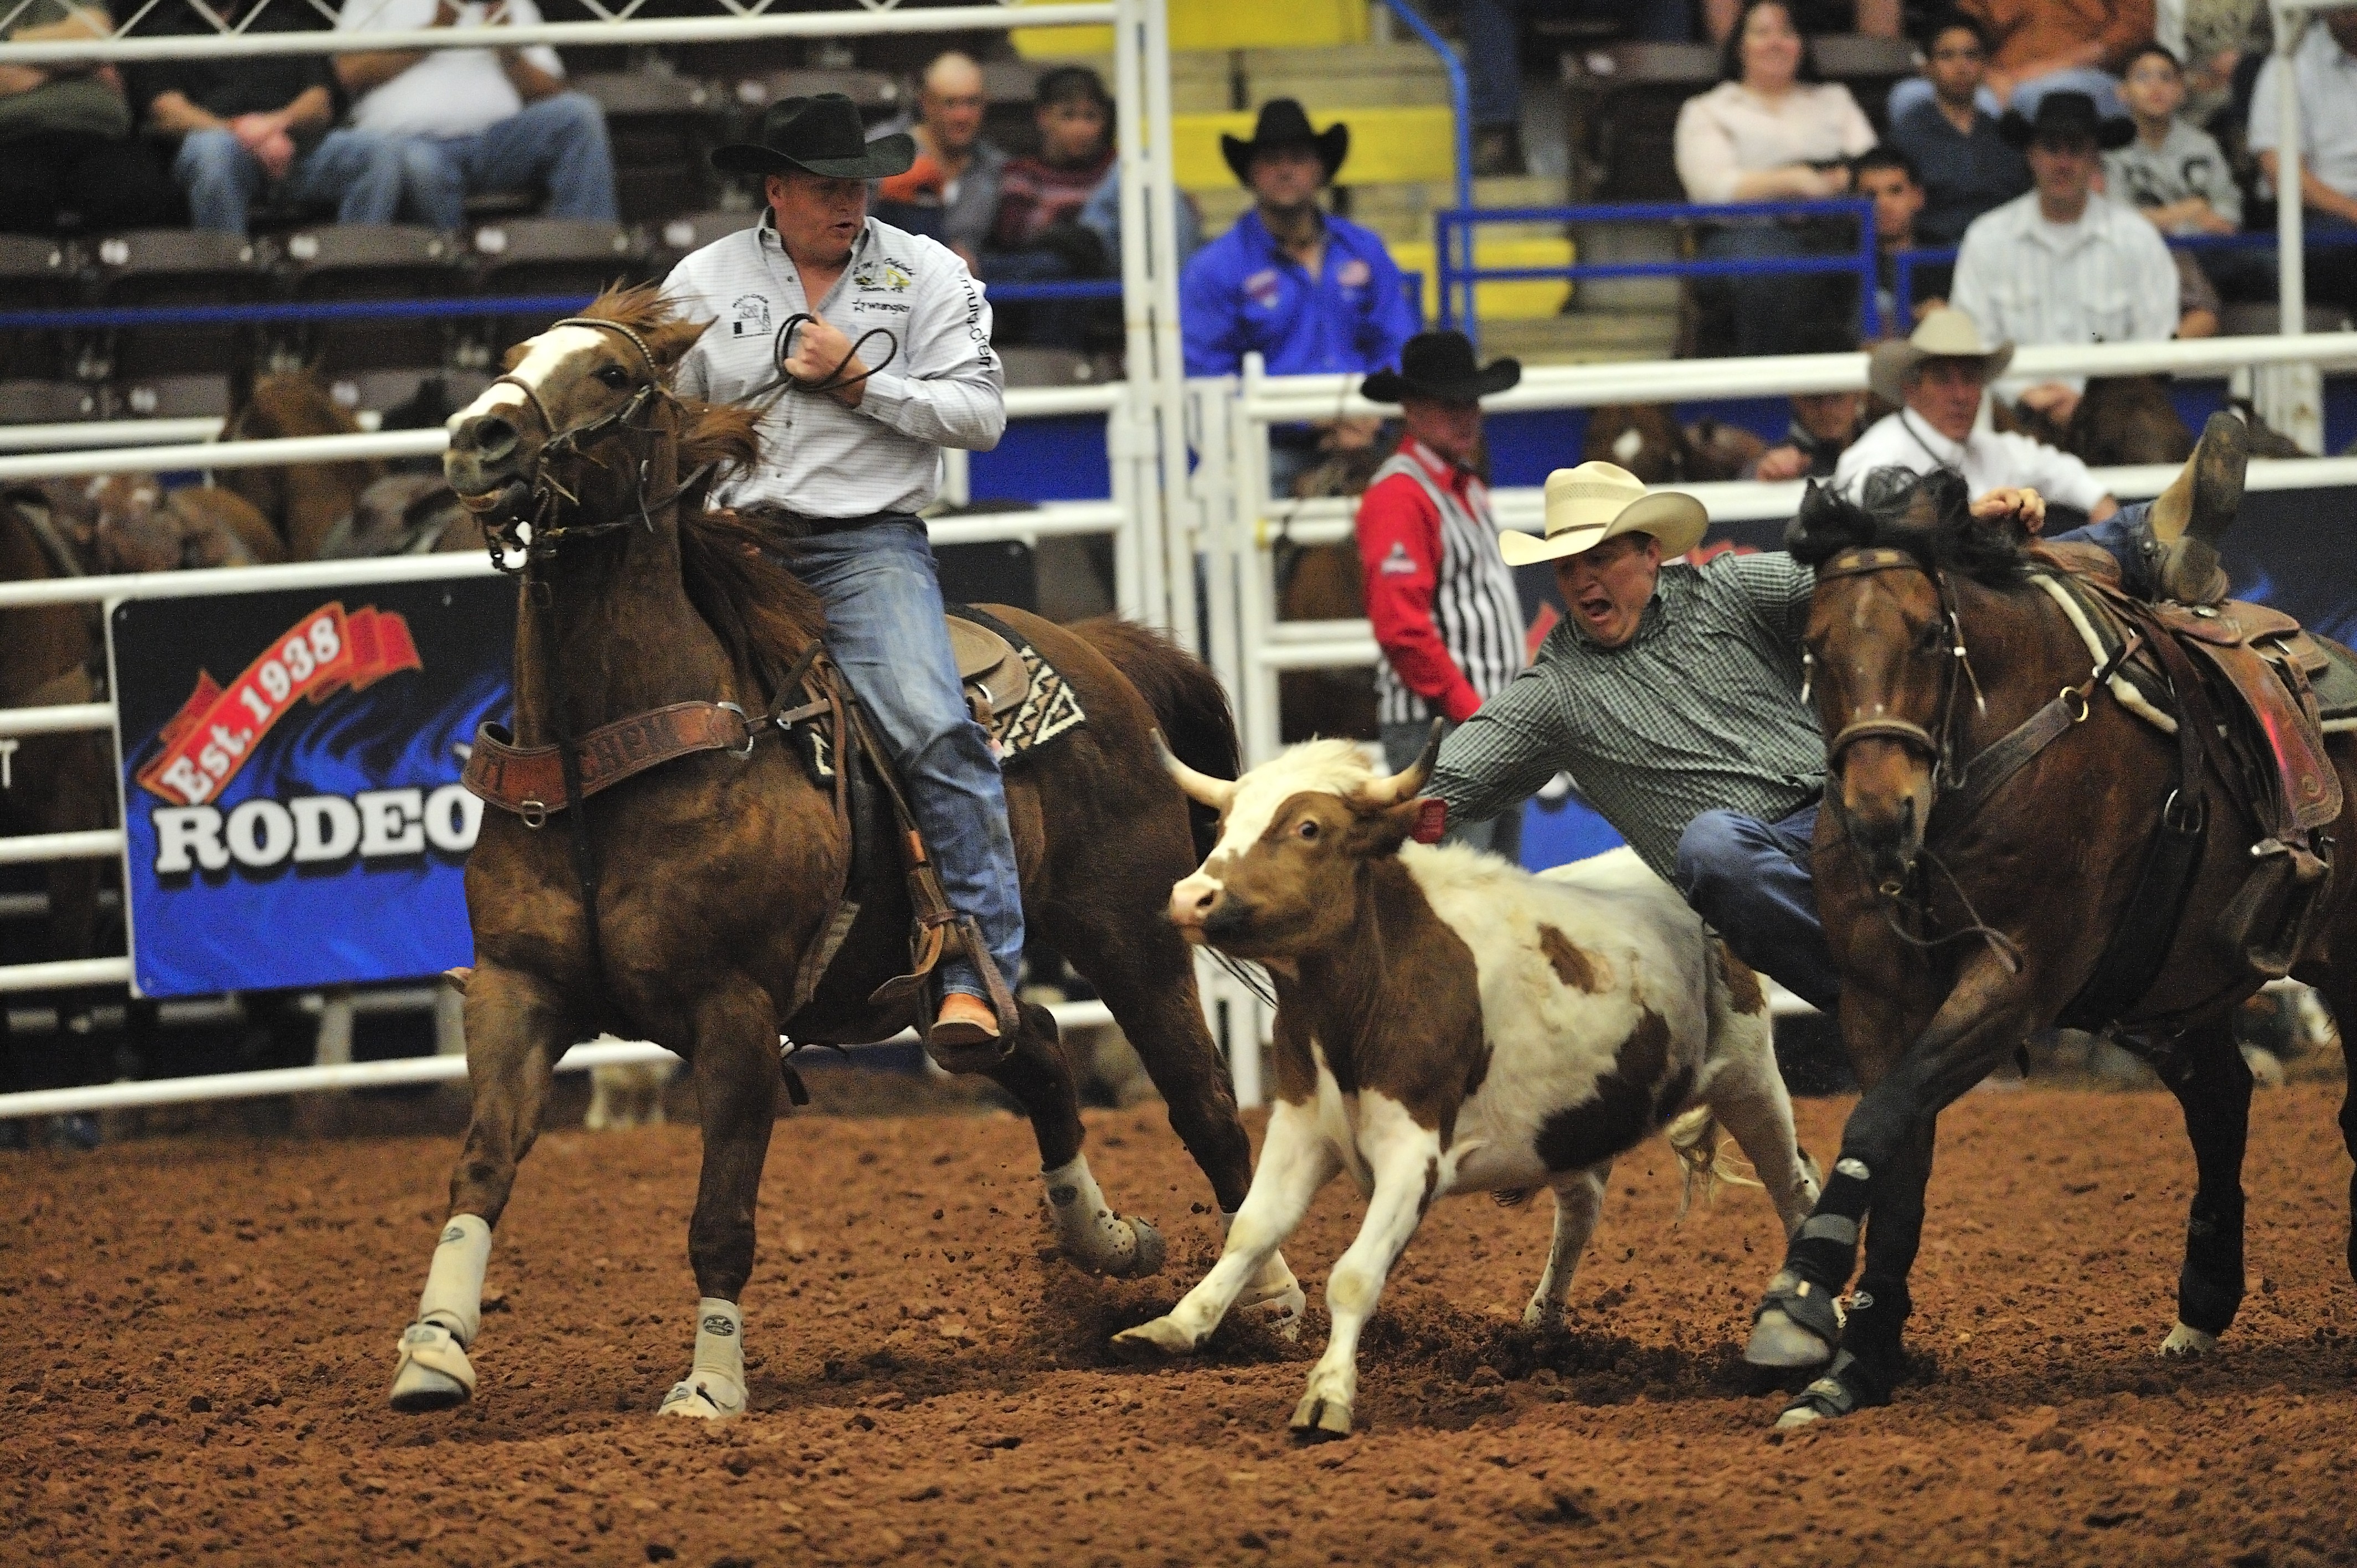 National Finals Rodeo Championship Weekend 200 Level Experience